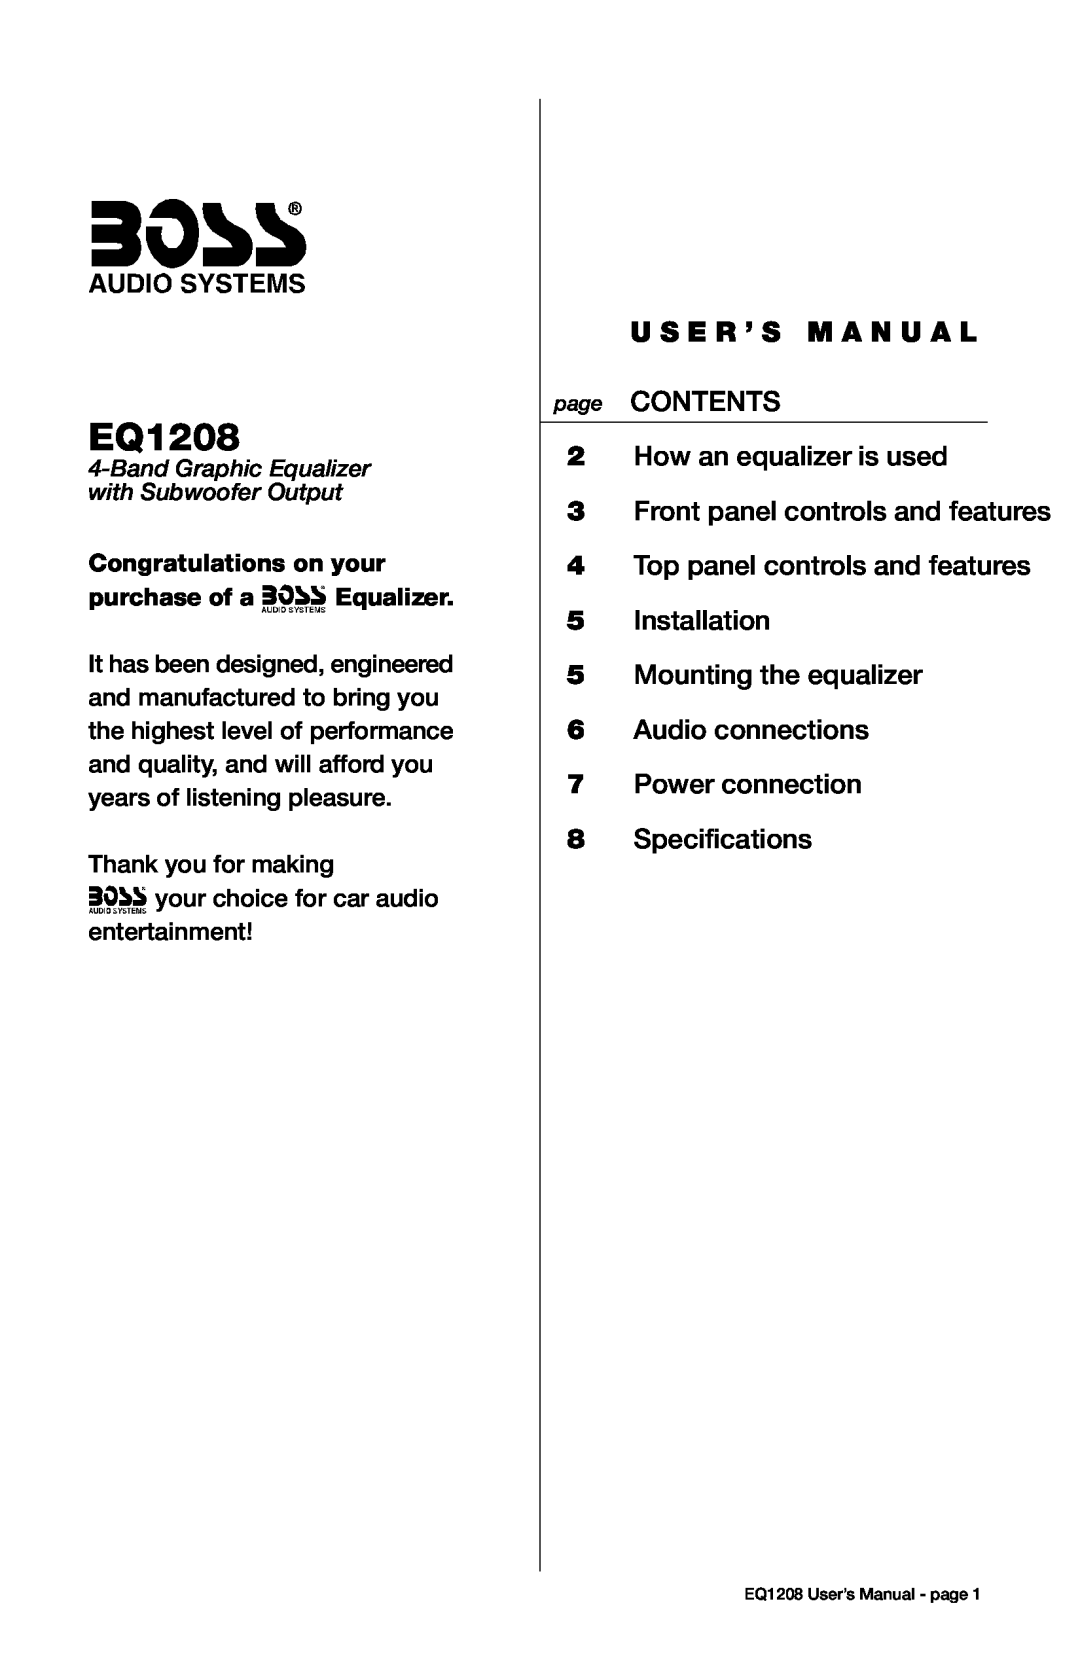 Boss Audio Systems EQ1208 user manual U S E R ’ S M A N U A L, page CONTENTS, 2How an equalizer is used 